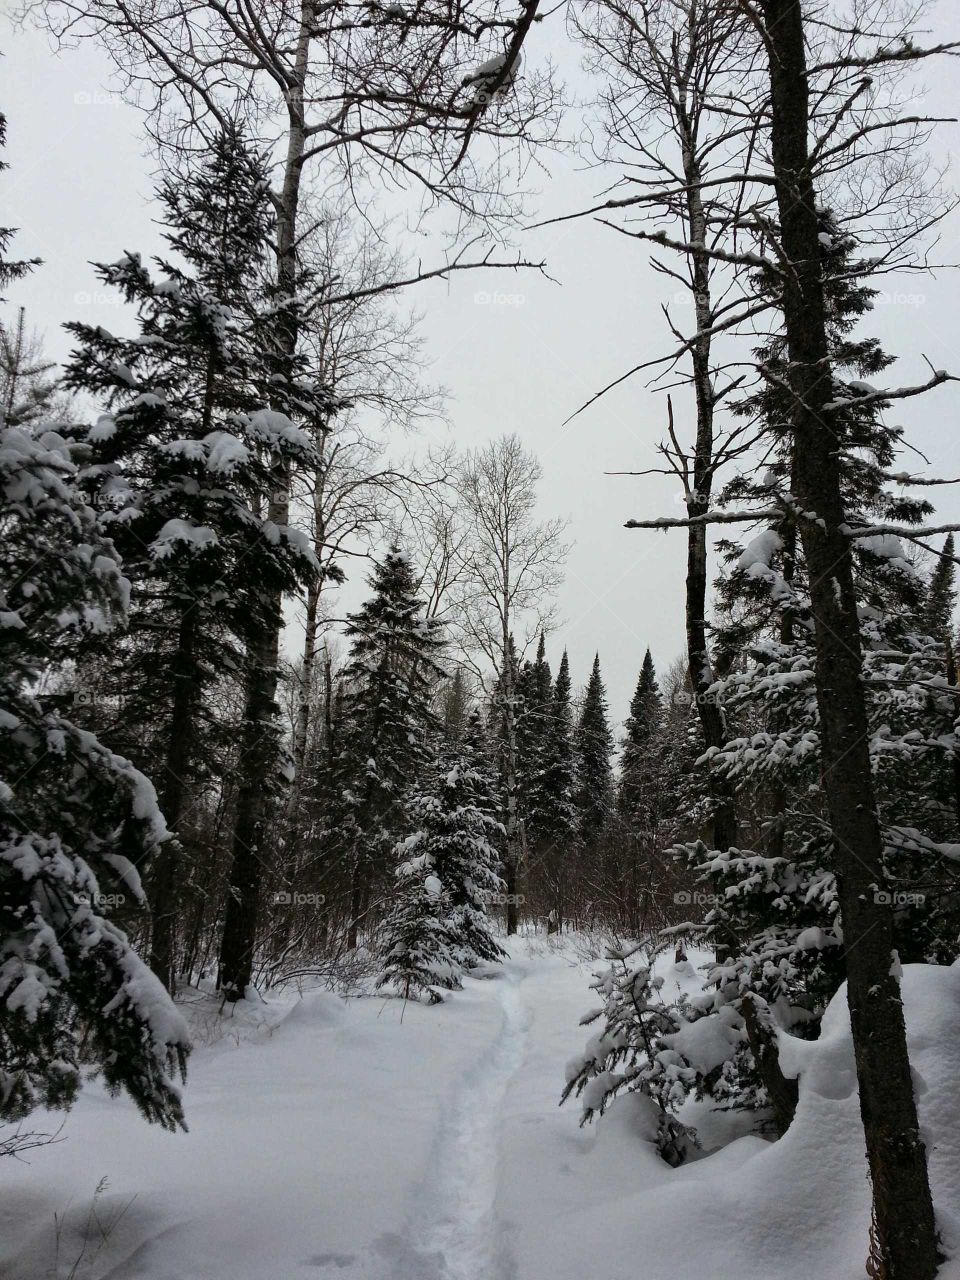 Snow shoe trail in a forest during winter